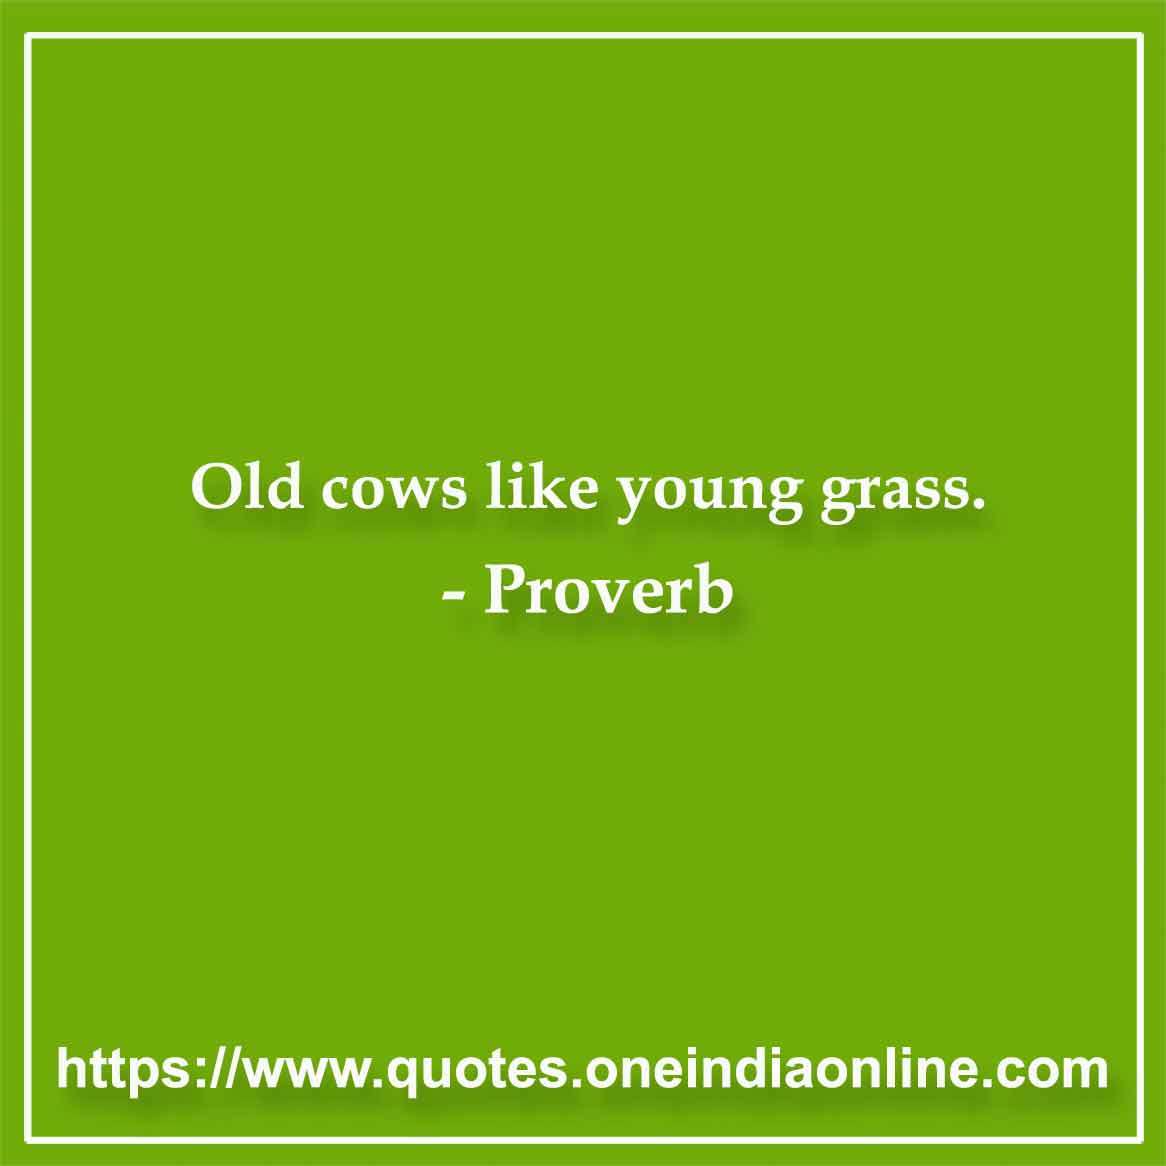 Old cows like young grass.

- Burmese